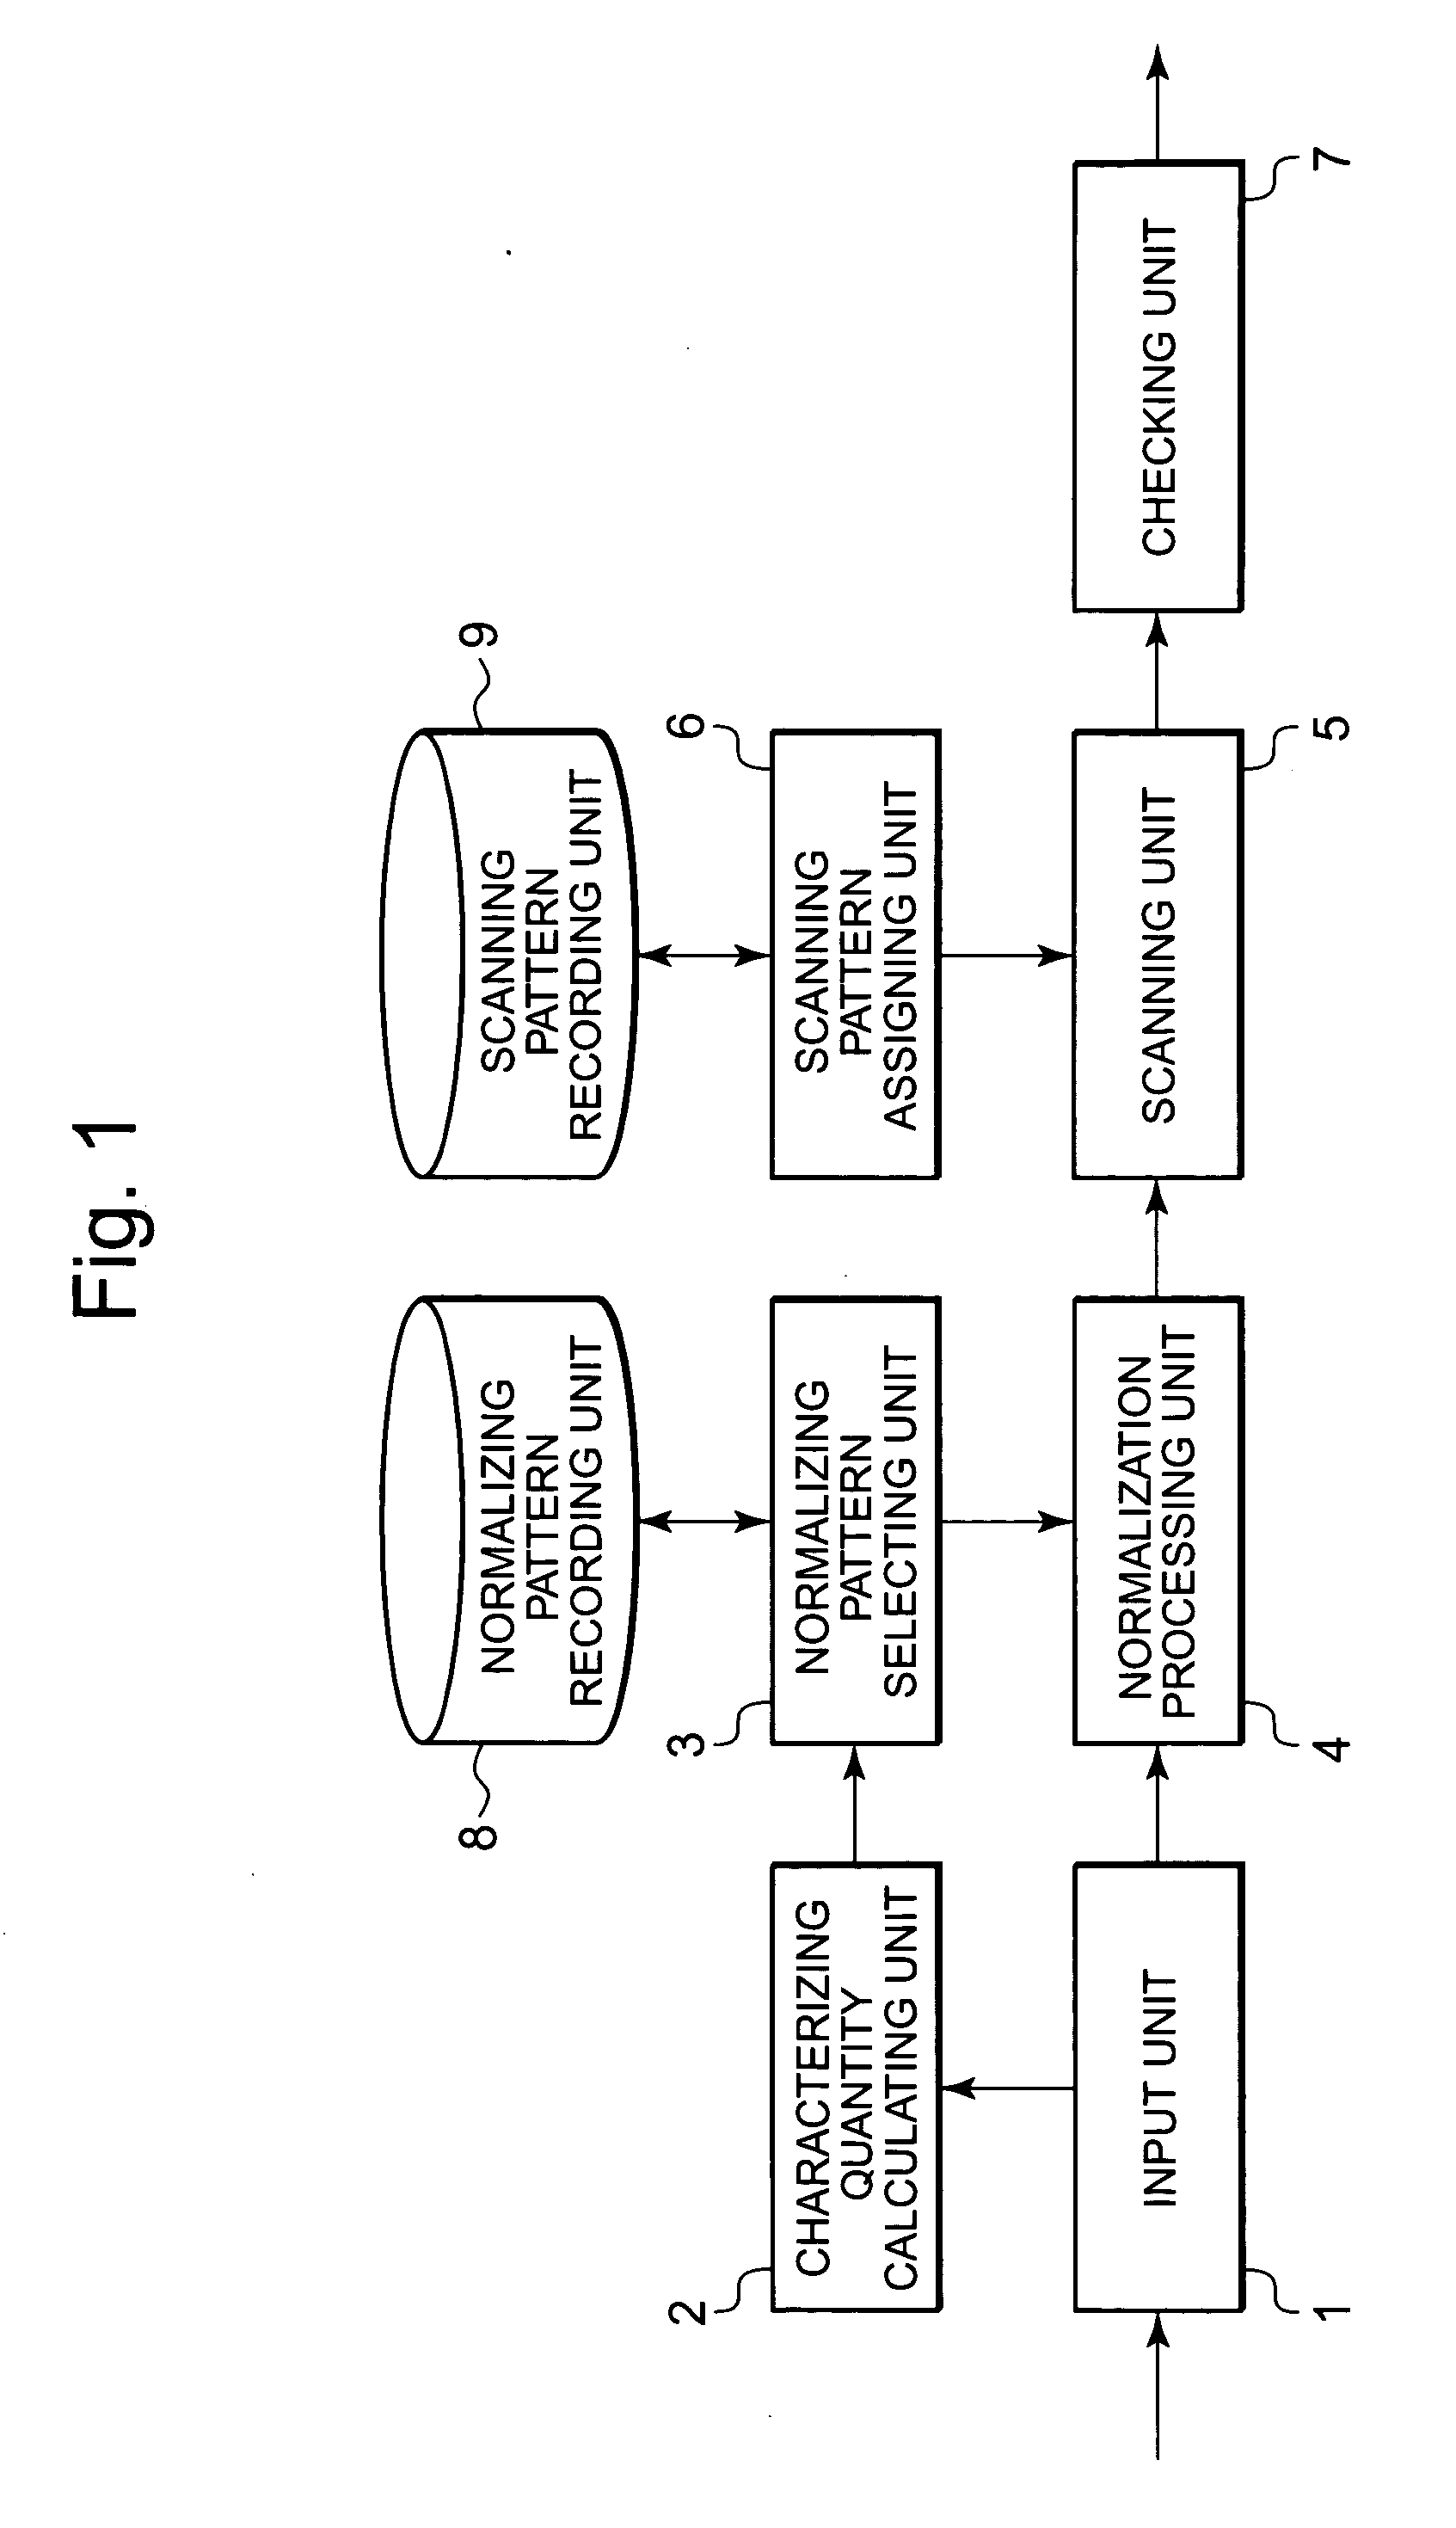 Image recognition device